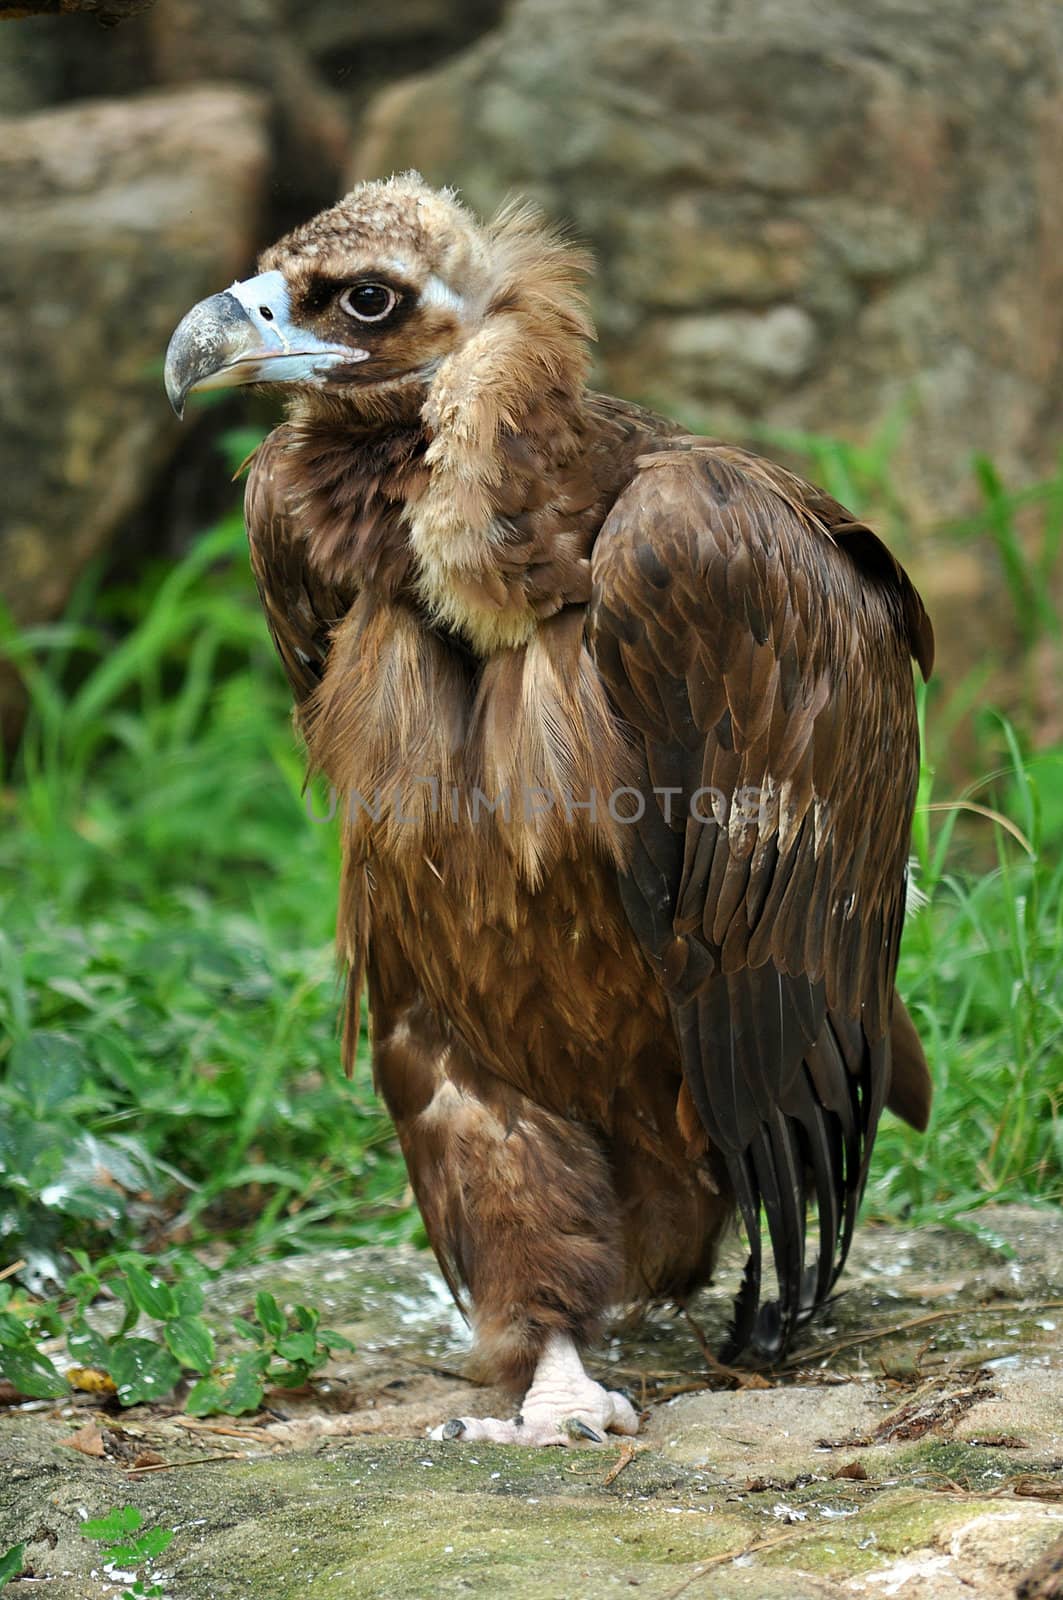 The Cinereous Vulture by MaZiKab